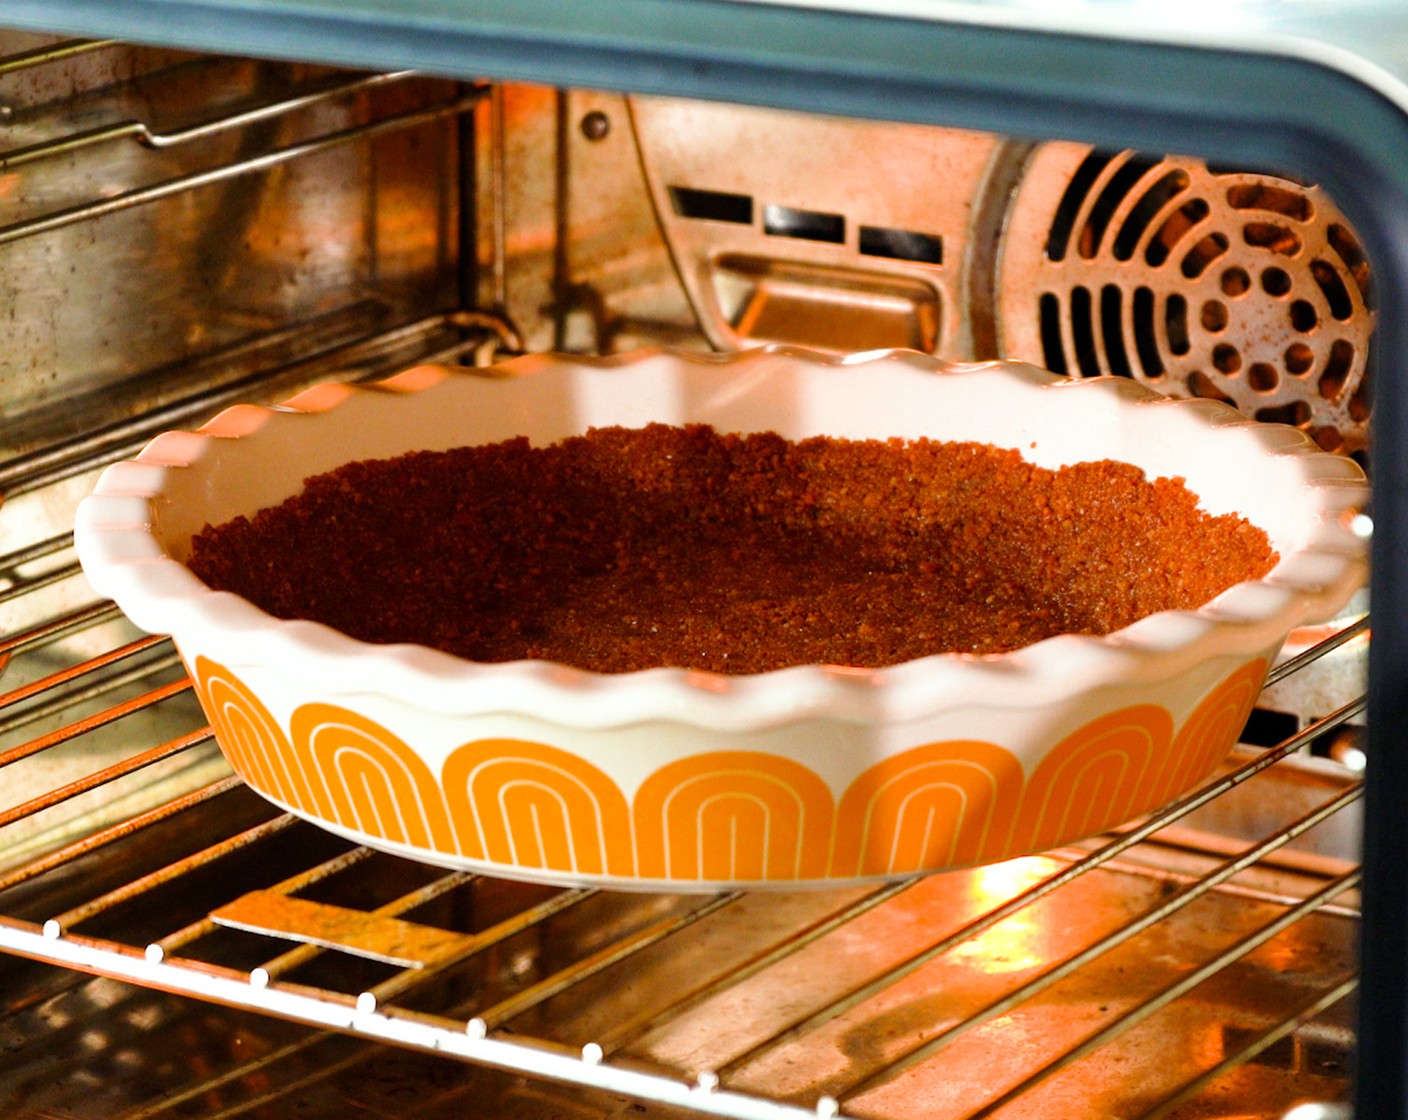 step 2 Press the mixture evenly into a 9-inch pie pan. Bake the crust for 10-15 minutes or until golden brown.